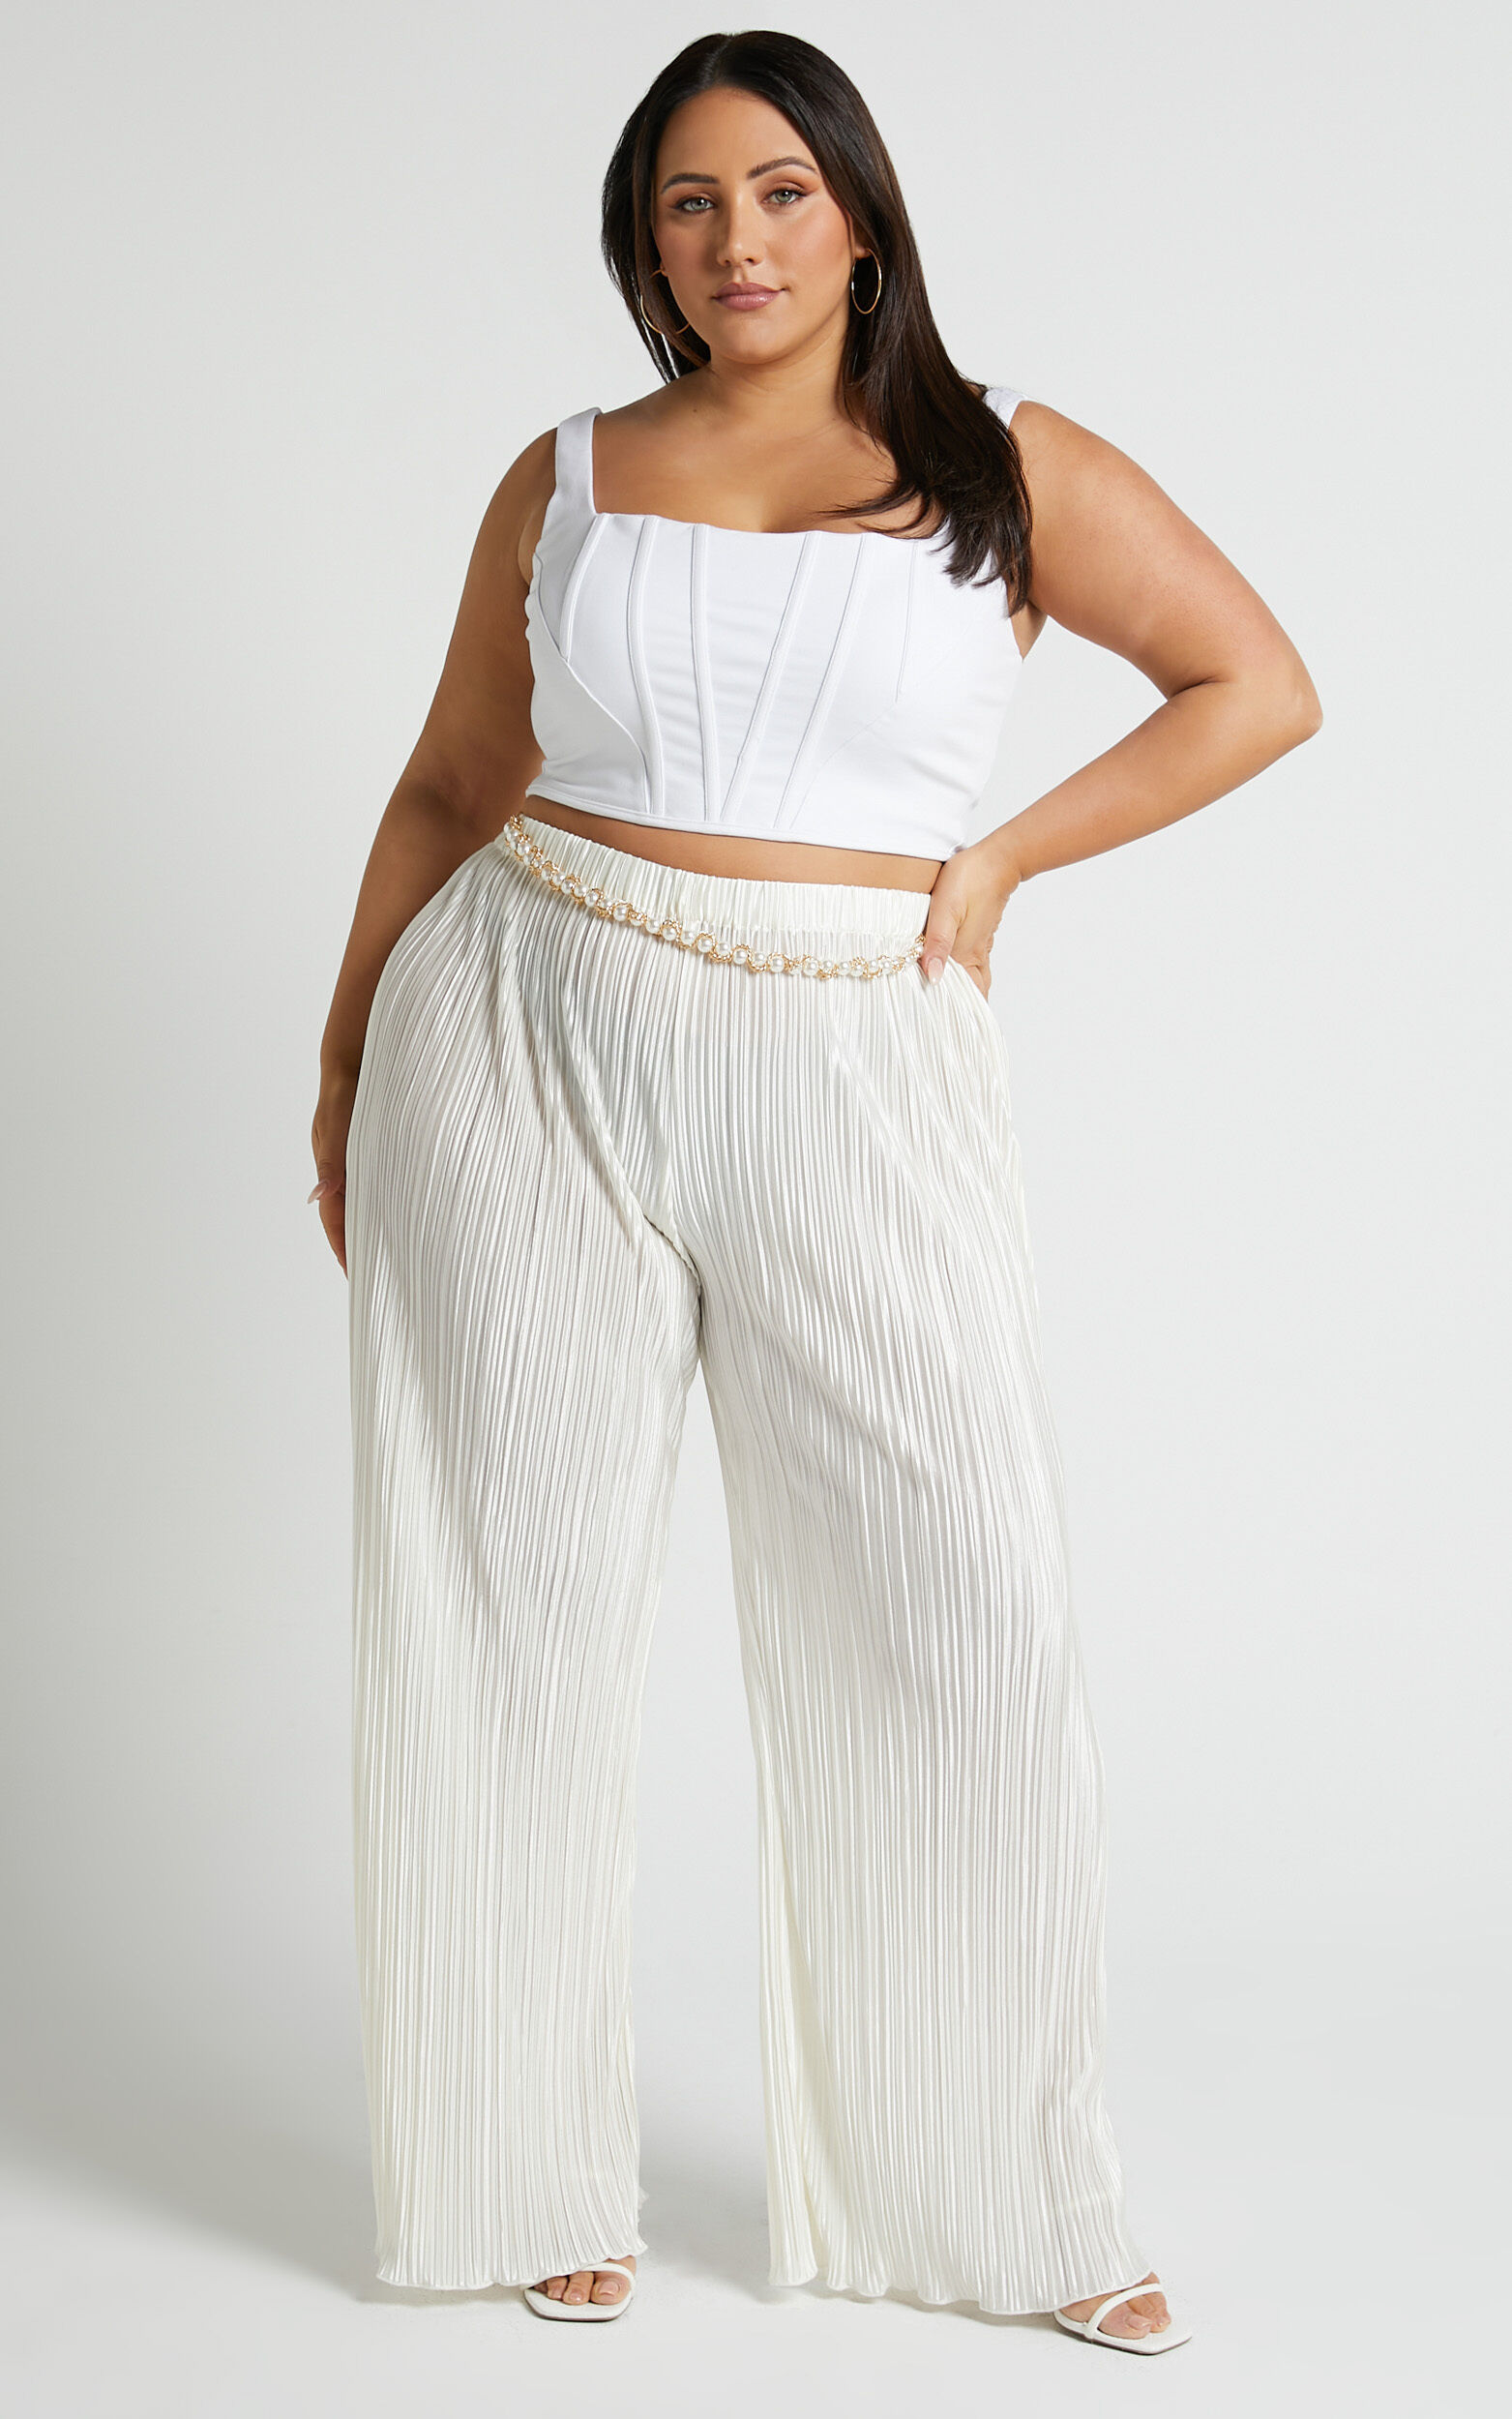 Beca Pants - High Waisted Plisse Flared Pants in Cream | Showpo USA